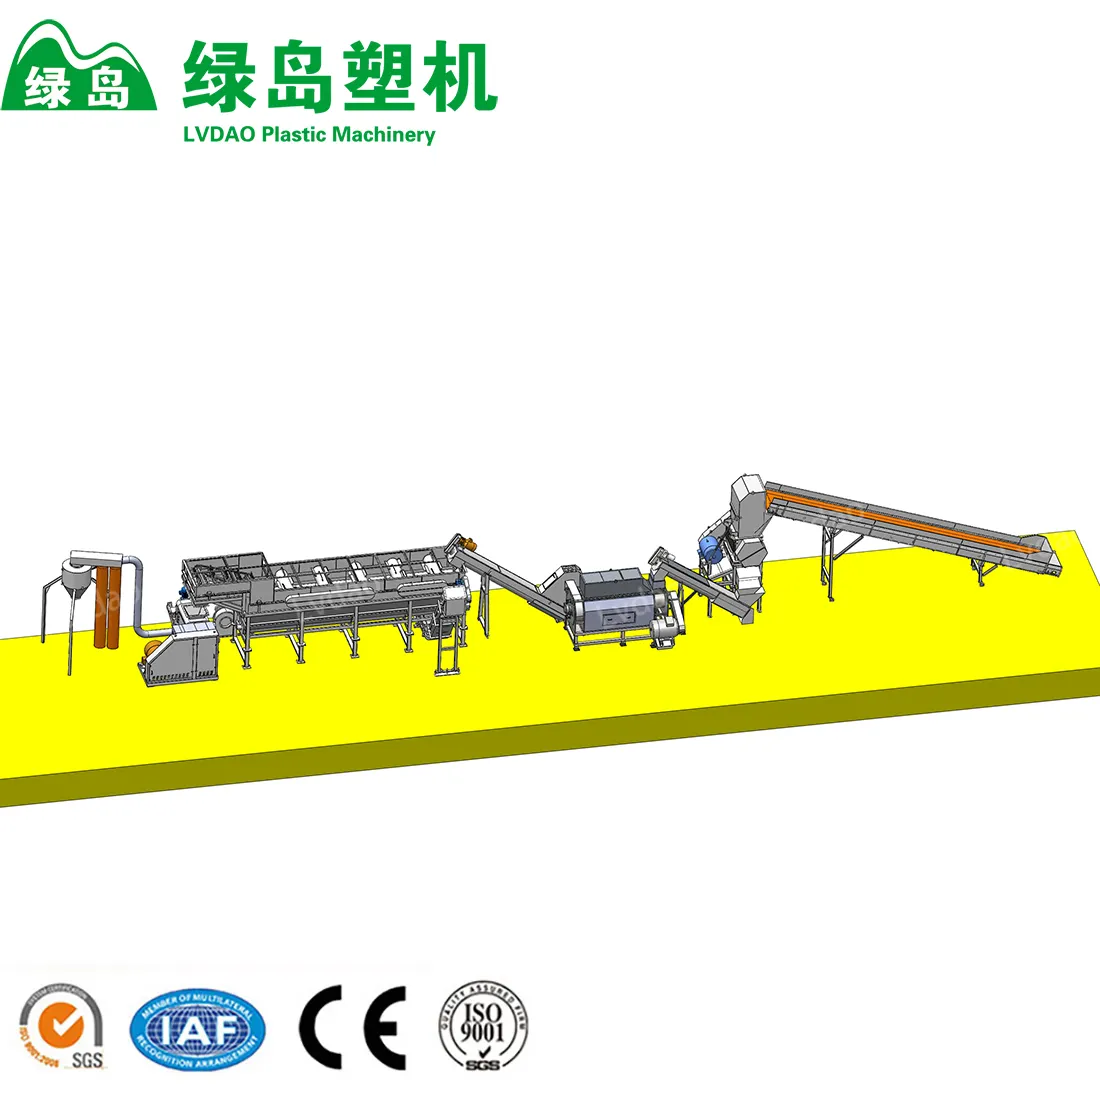 Lvdao Machine Industrial Waste Material Plastic Pp Pe Pet Recycling Washing Equipment Line Recyclable Plant Machine